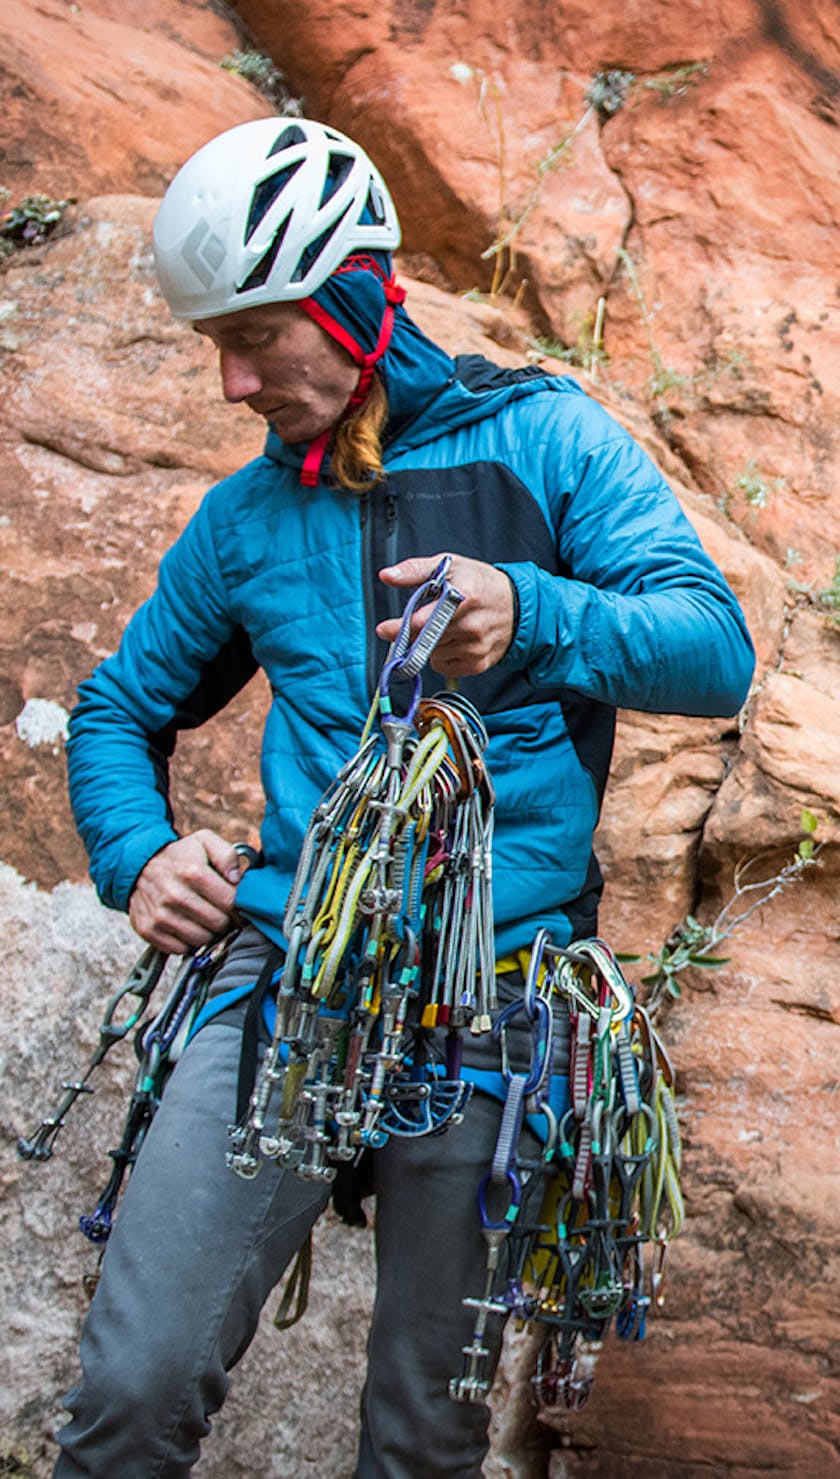 Photograph by Andy Earl of Big Wall Paul with rock climbing gear.